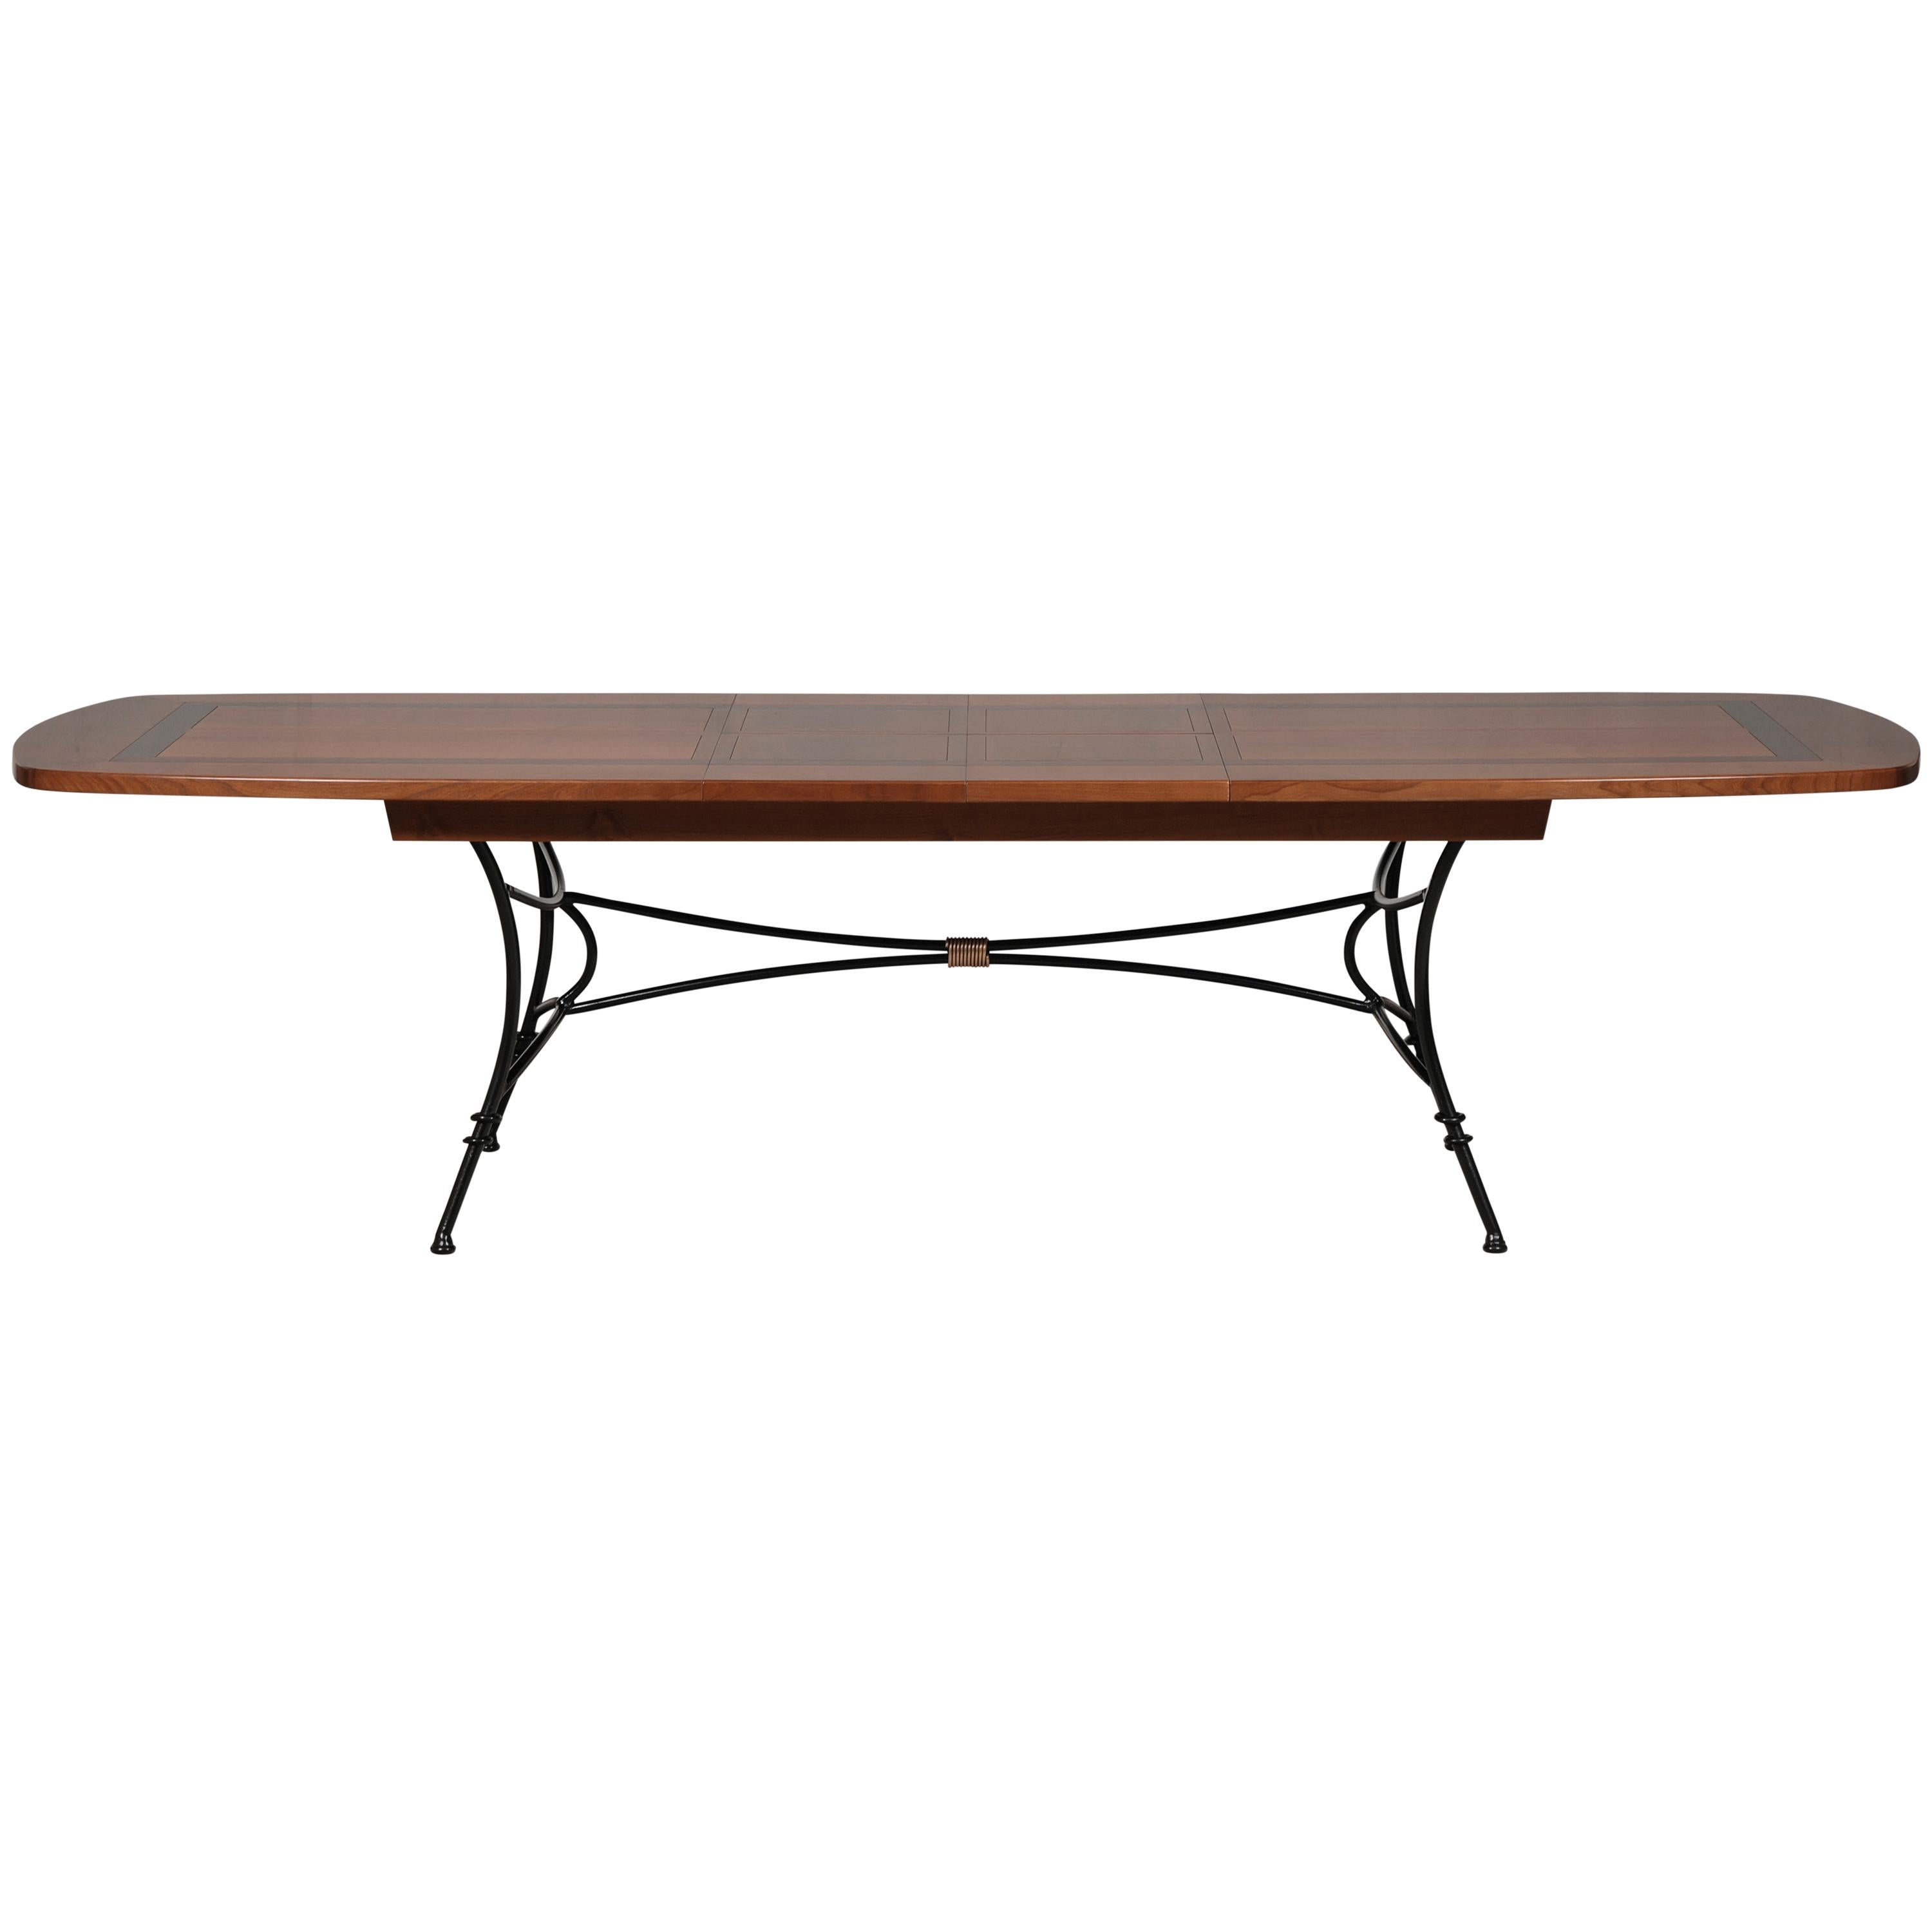 Neoclassical Dining Table with Wrought Iron Legs, Cherry Stained with Black Lacquered Pattern For Sale